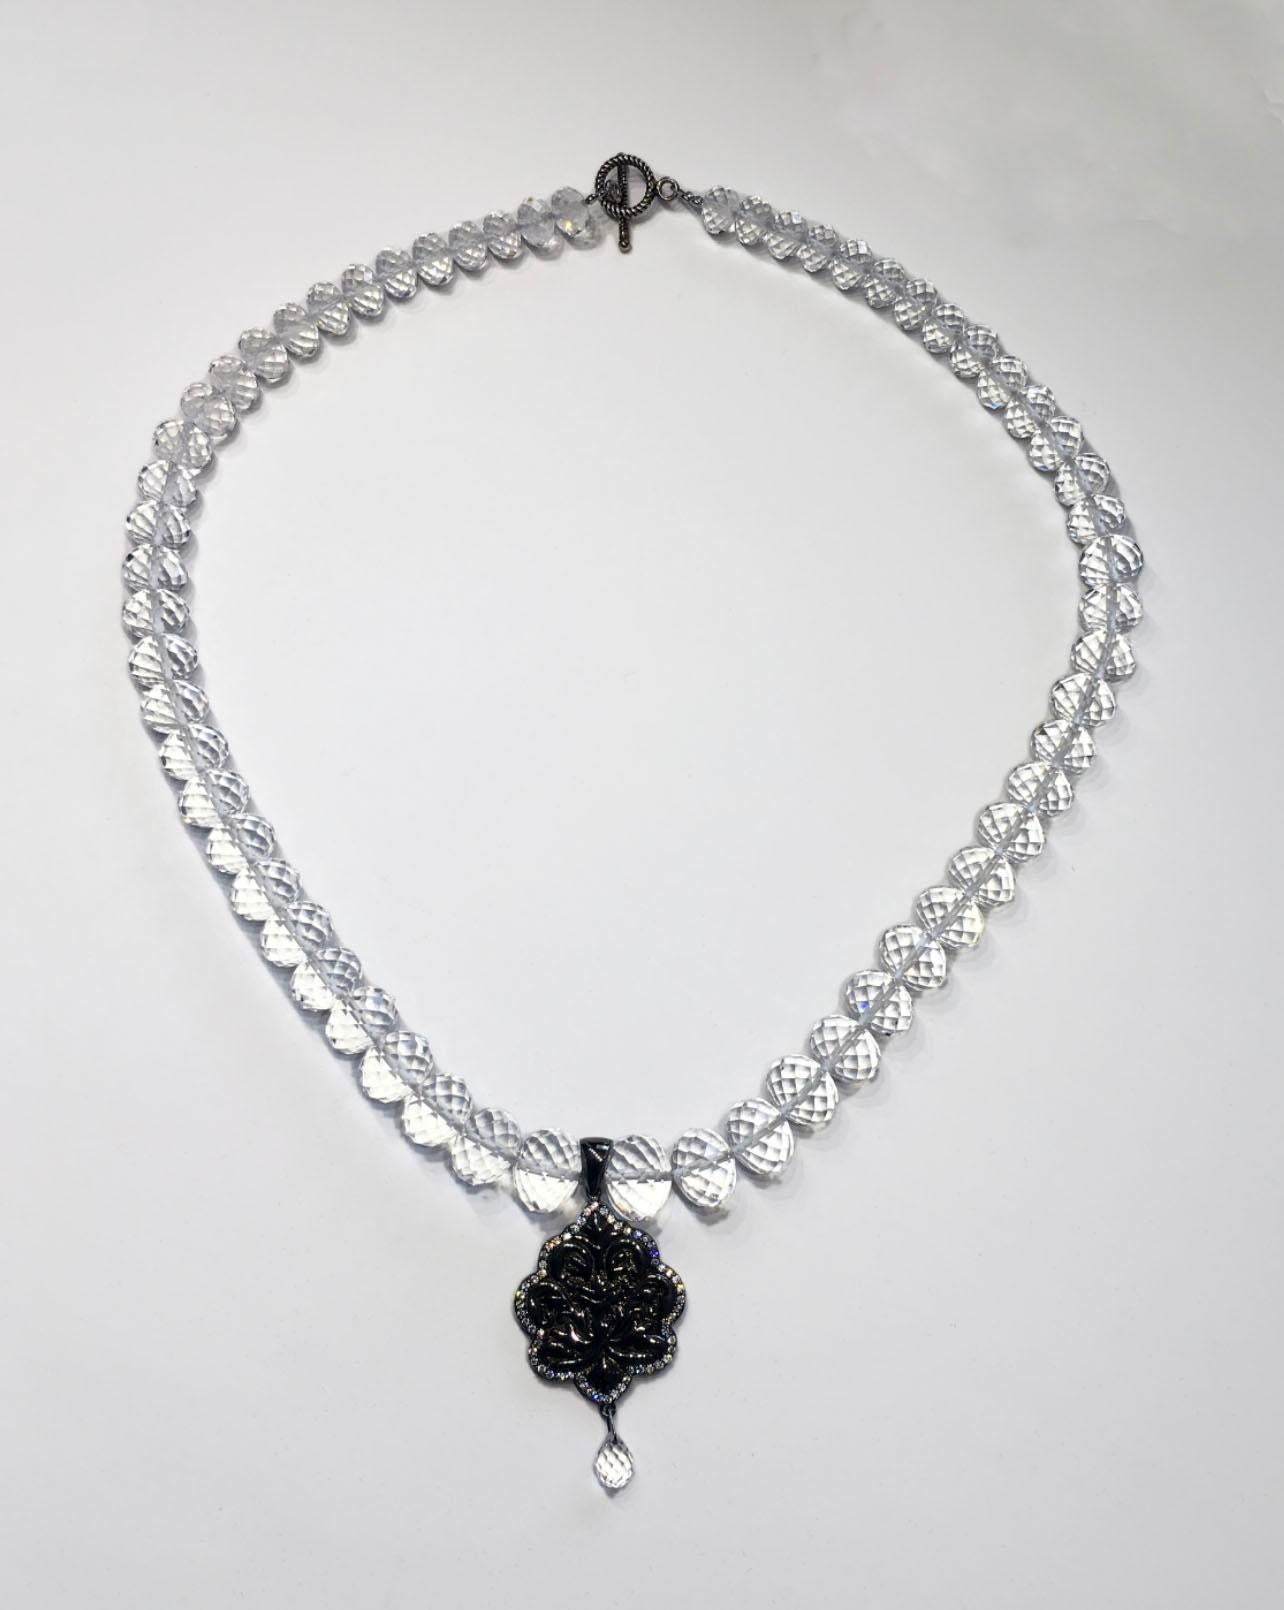 Women's Quartz Beaded Necklace with a Blackened Silver Pendant Set with Sapphires